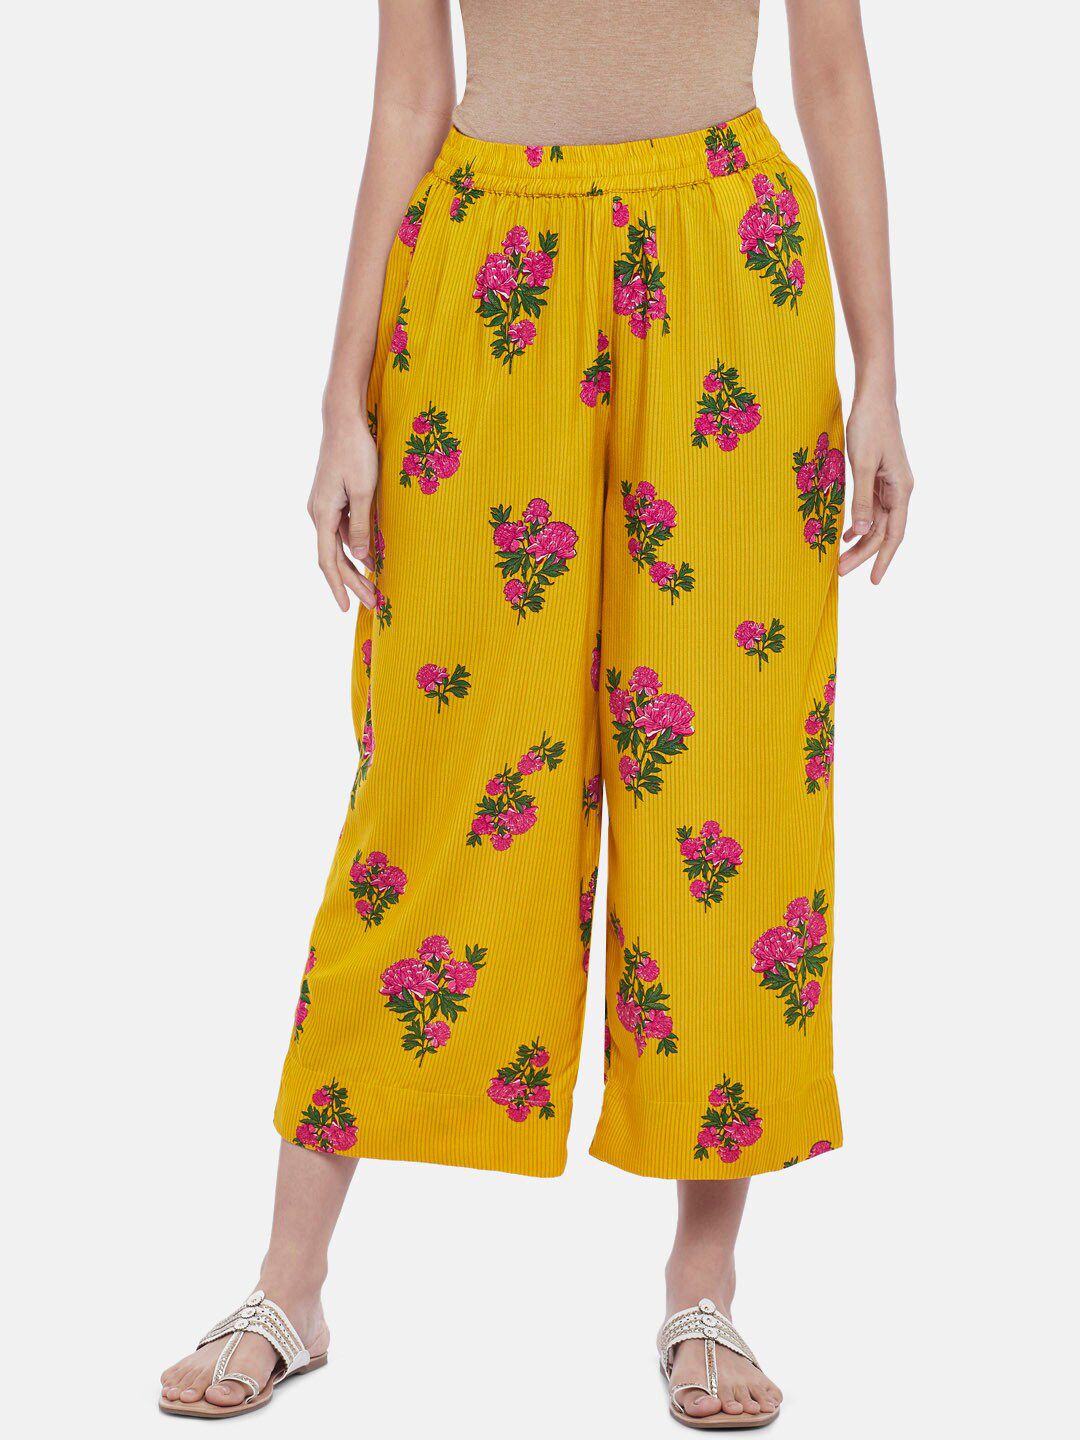 RANGMANCH BY PANTALOONS Women Yellow & Pink Floral Printed Ethnic Palazzos Price in India